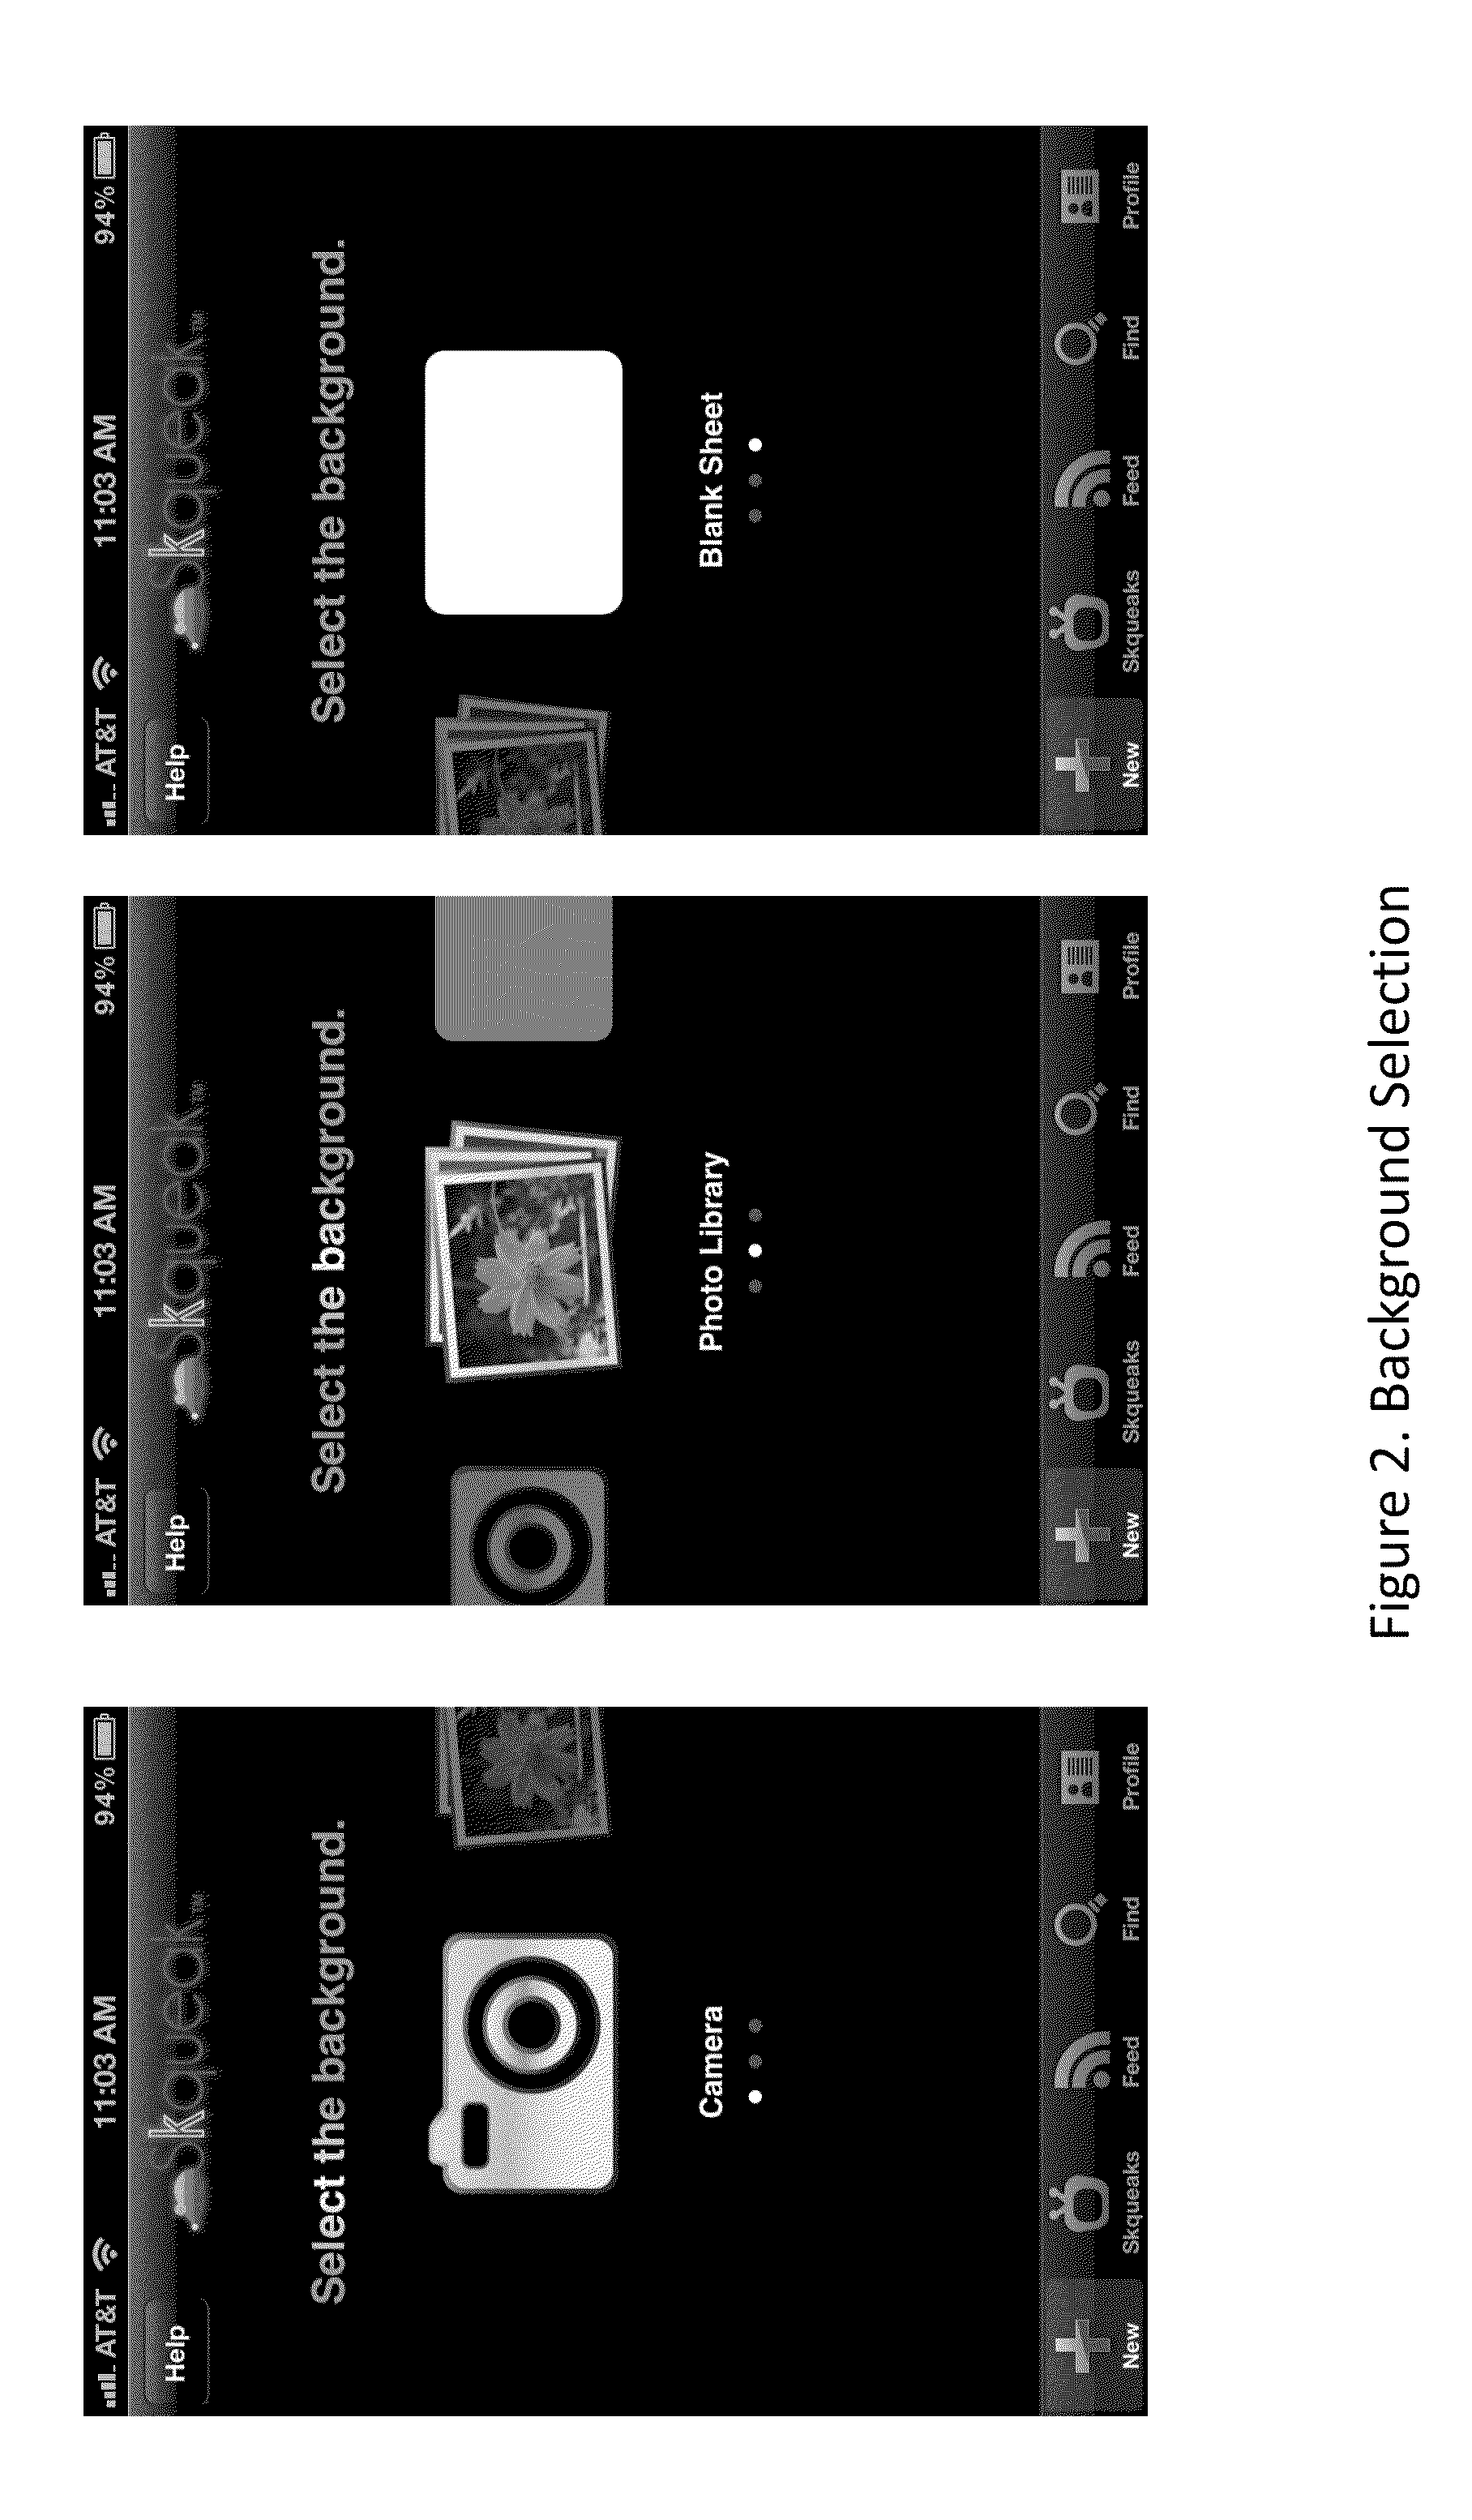 System and method for electronic communication using a voiceover in combination with user interaction events on a selected background